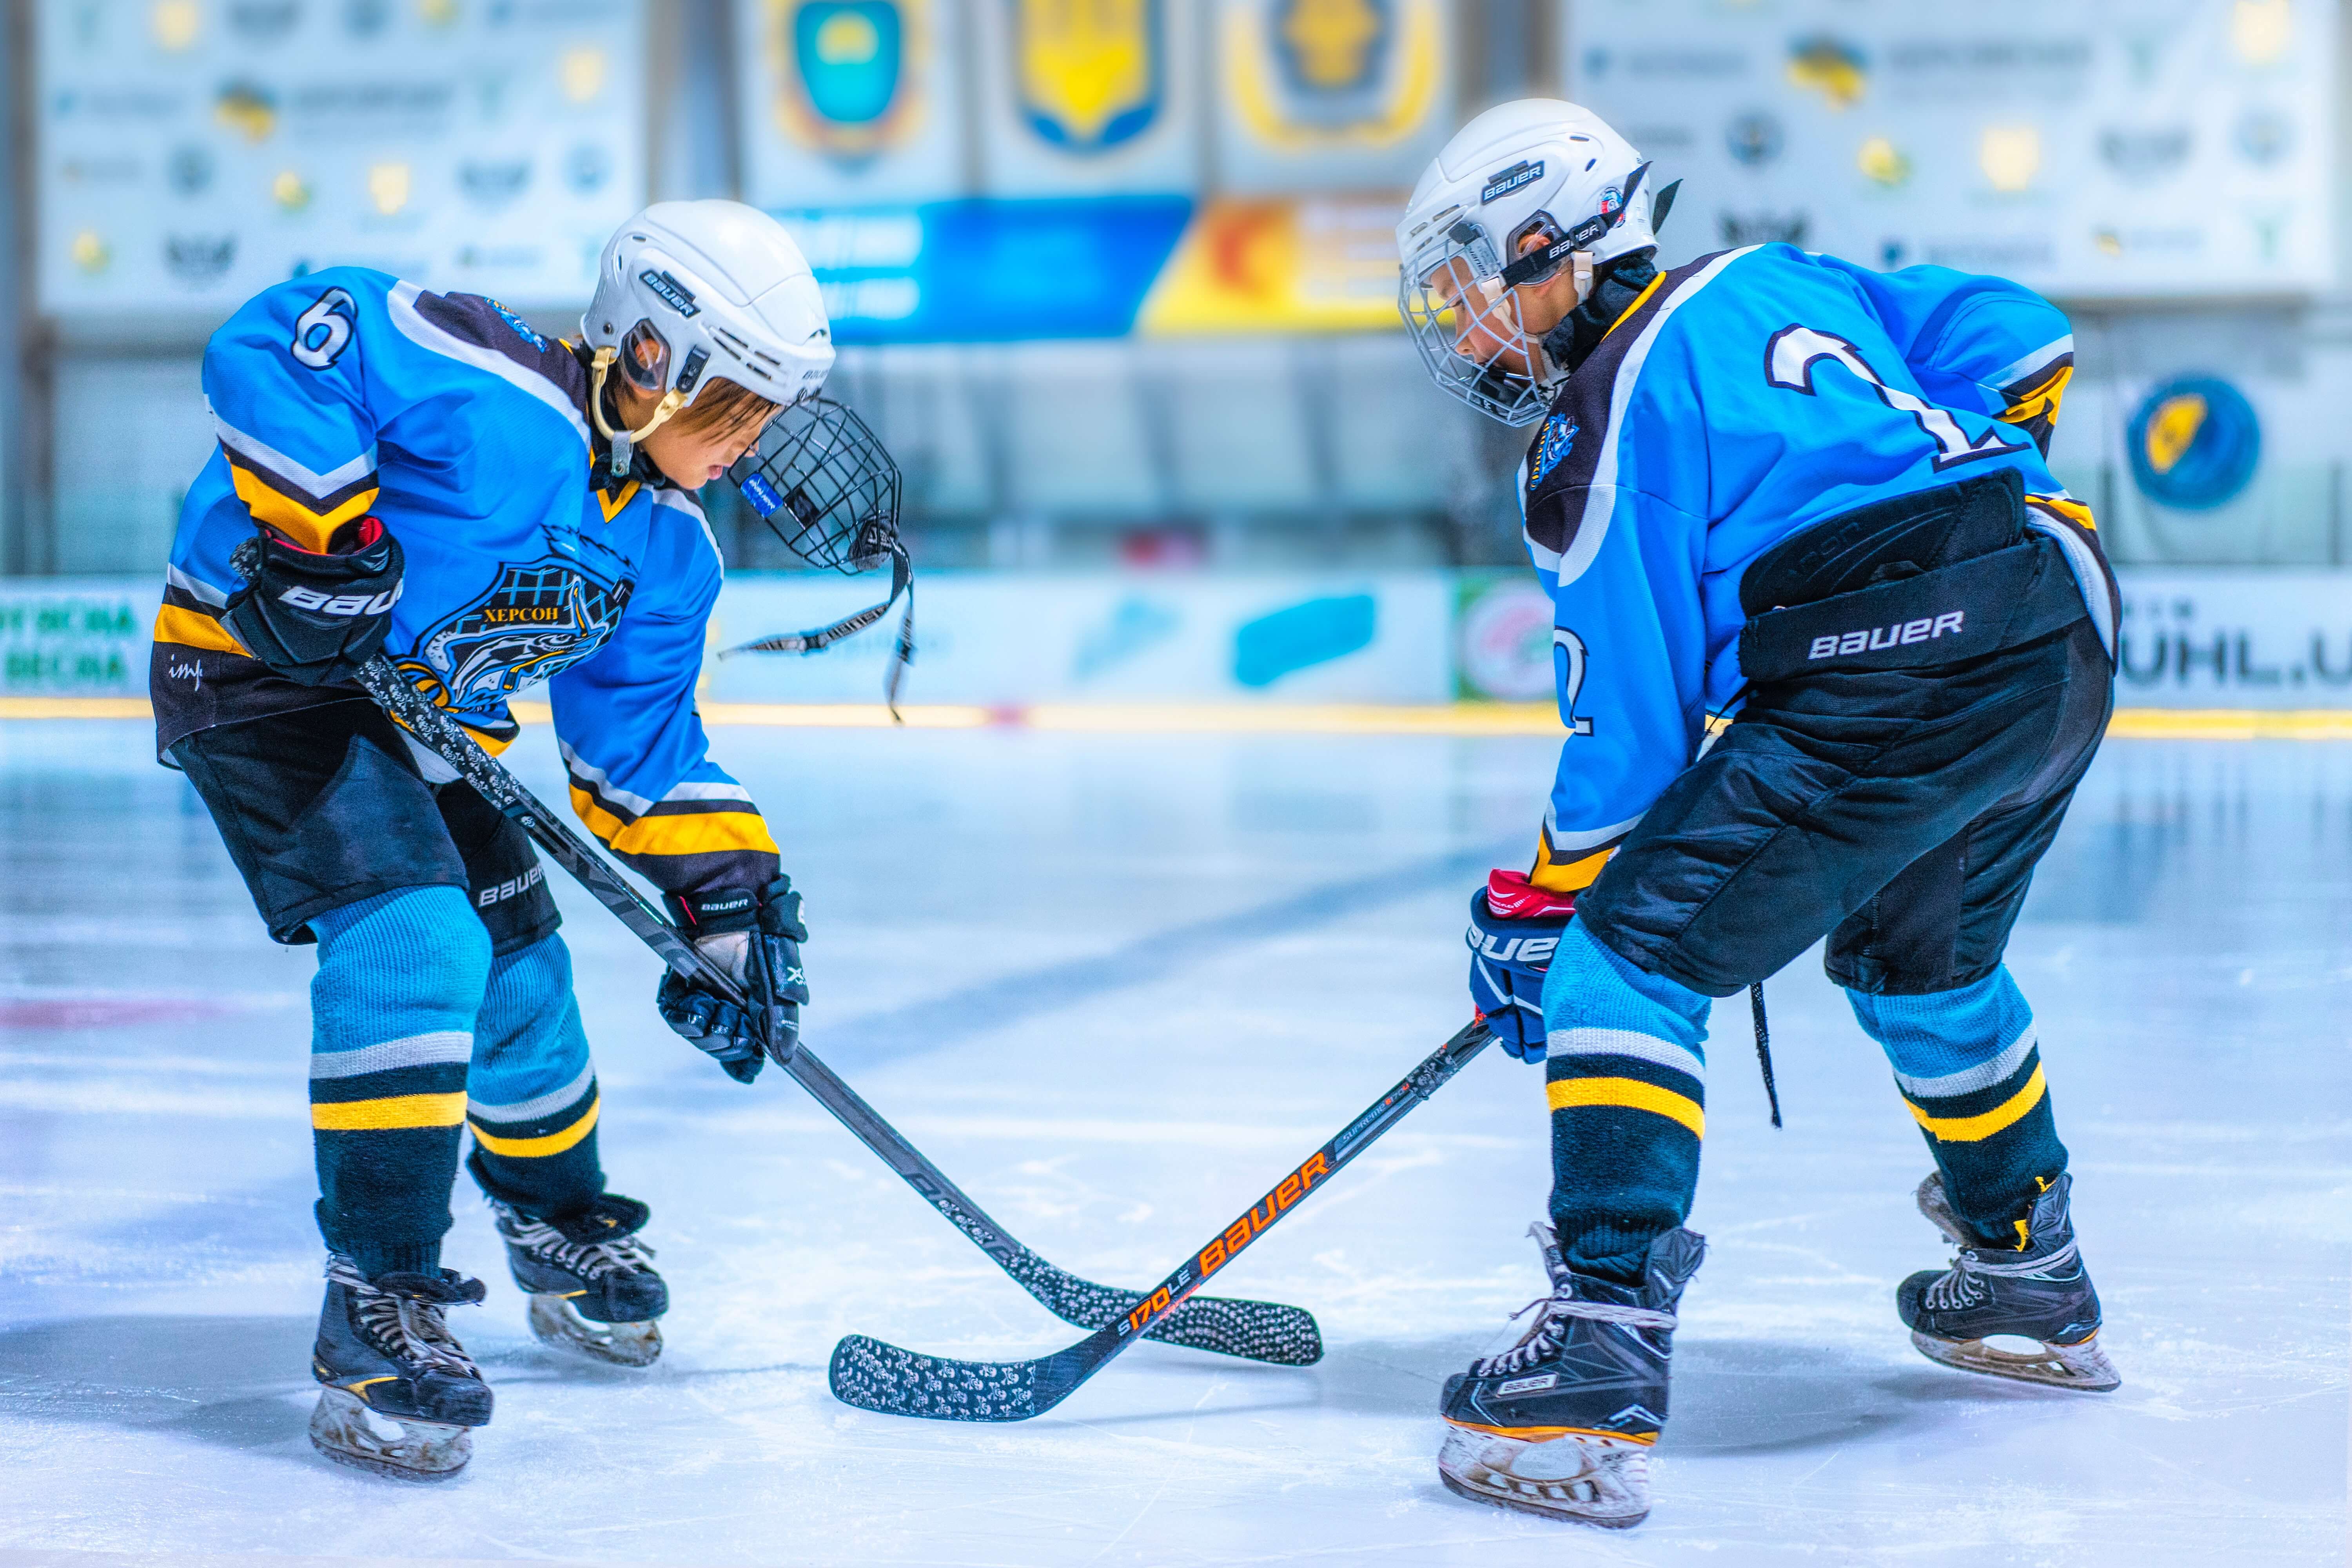 two-hockey-players-on-rink-3159812